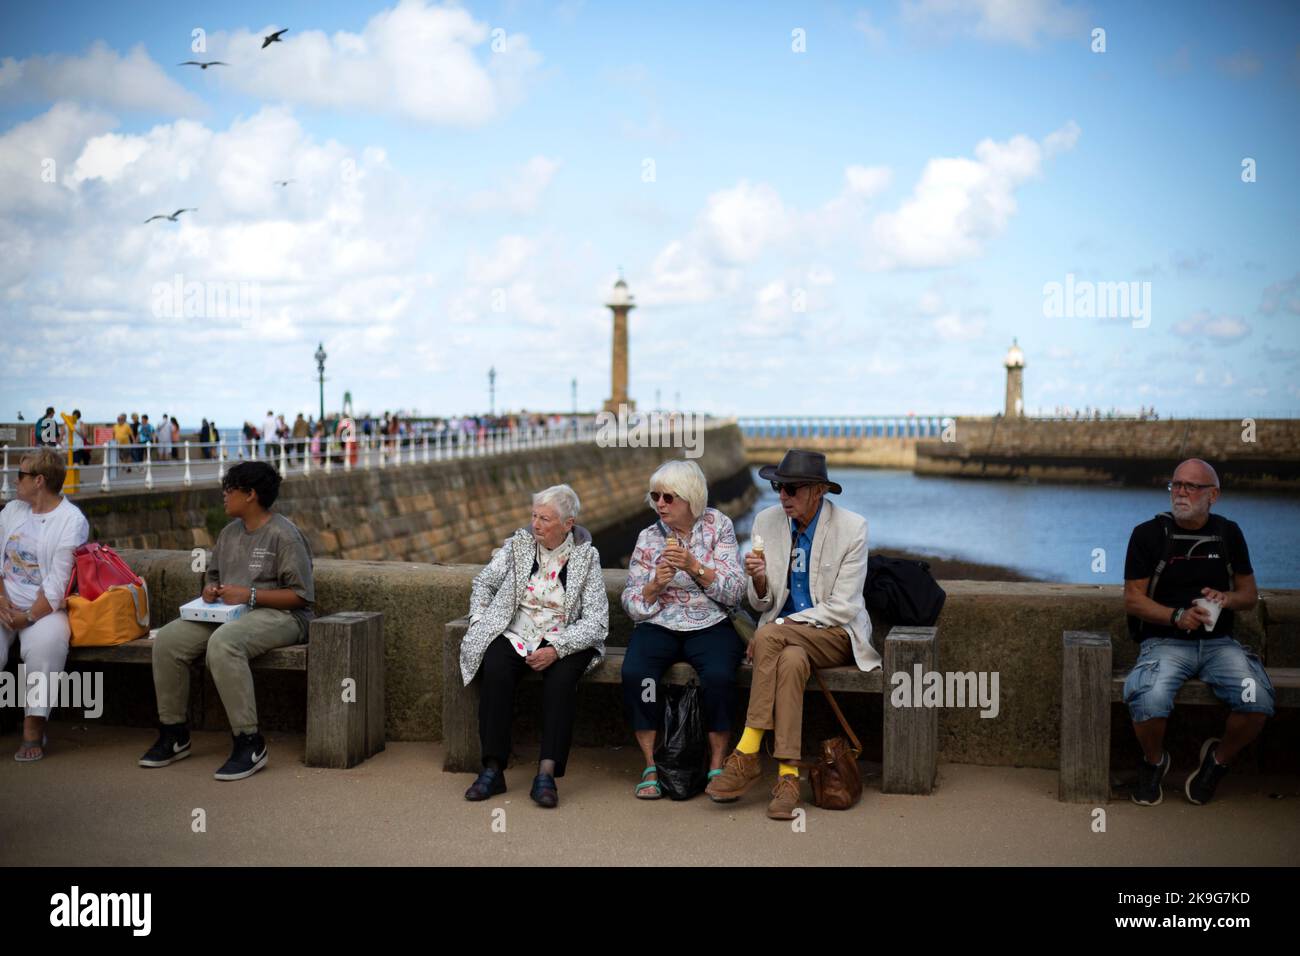 People eating ice cream in the seaside town of Whitby in North Yorkshire in Northern England. Stock Photo